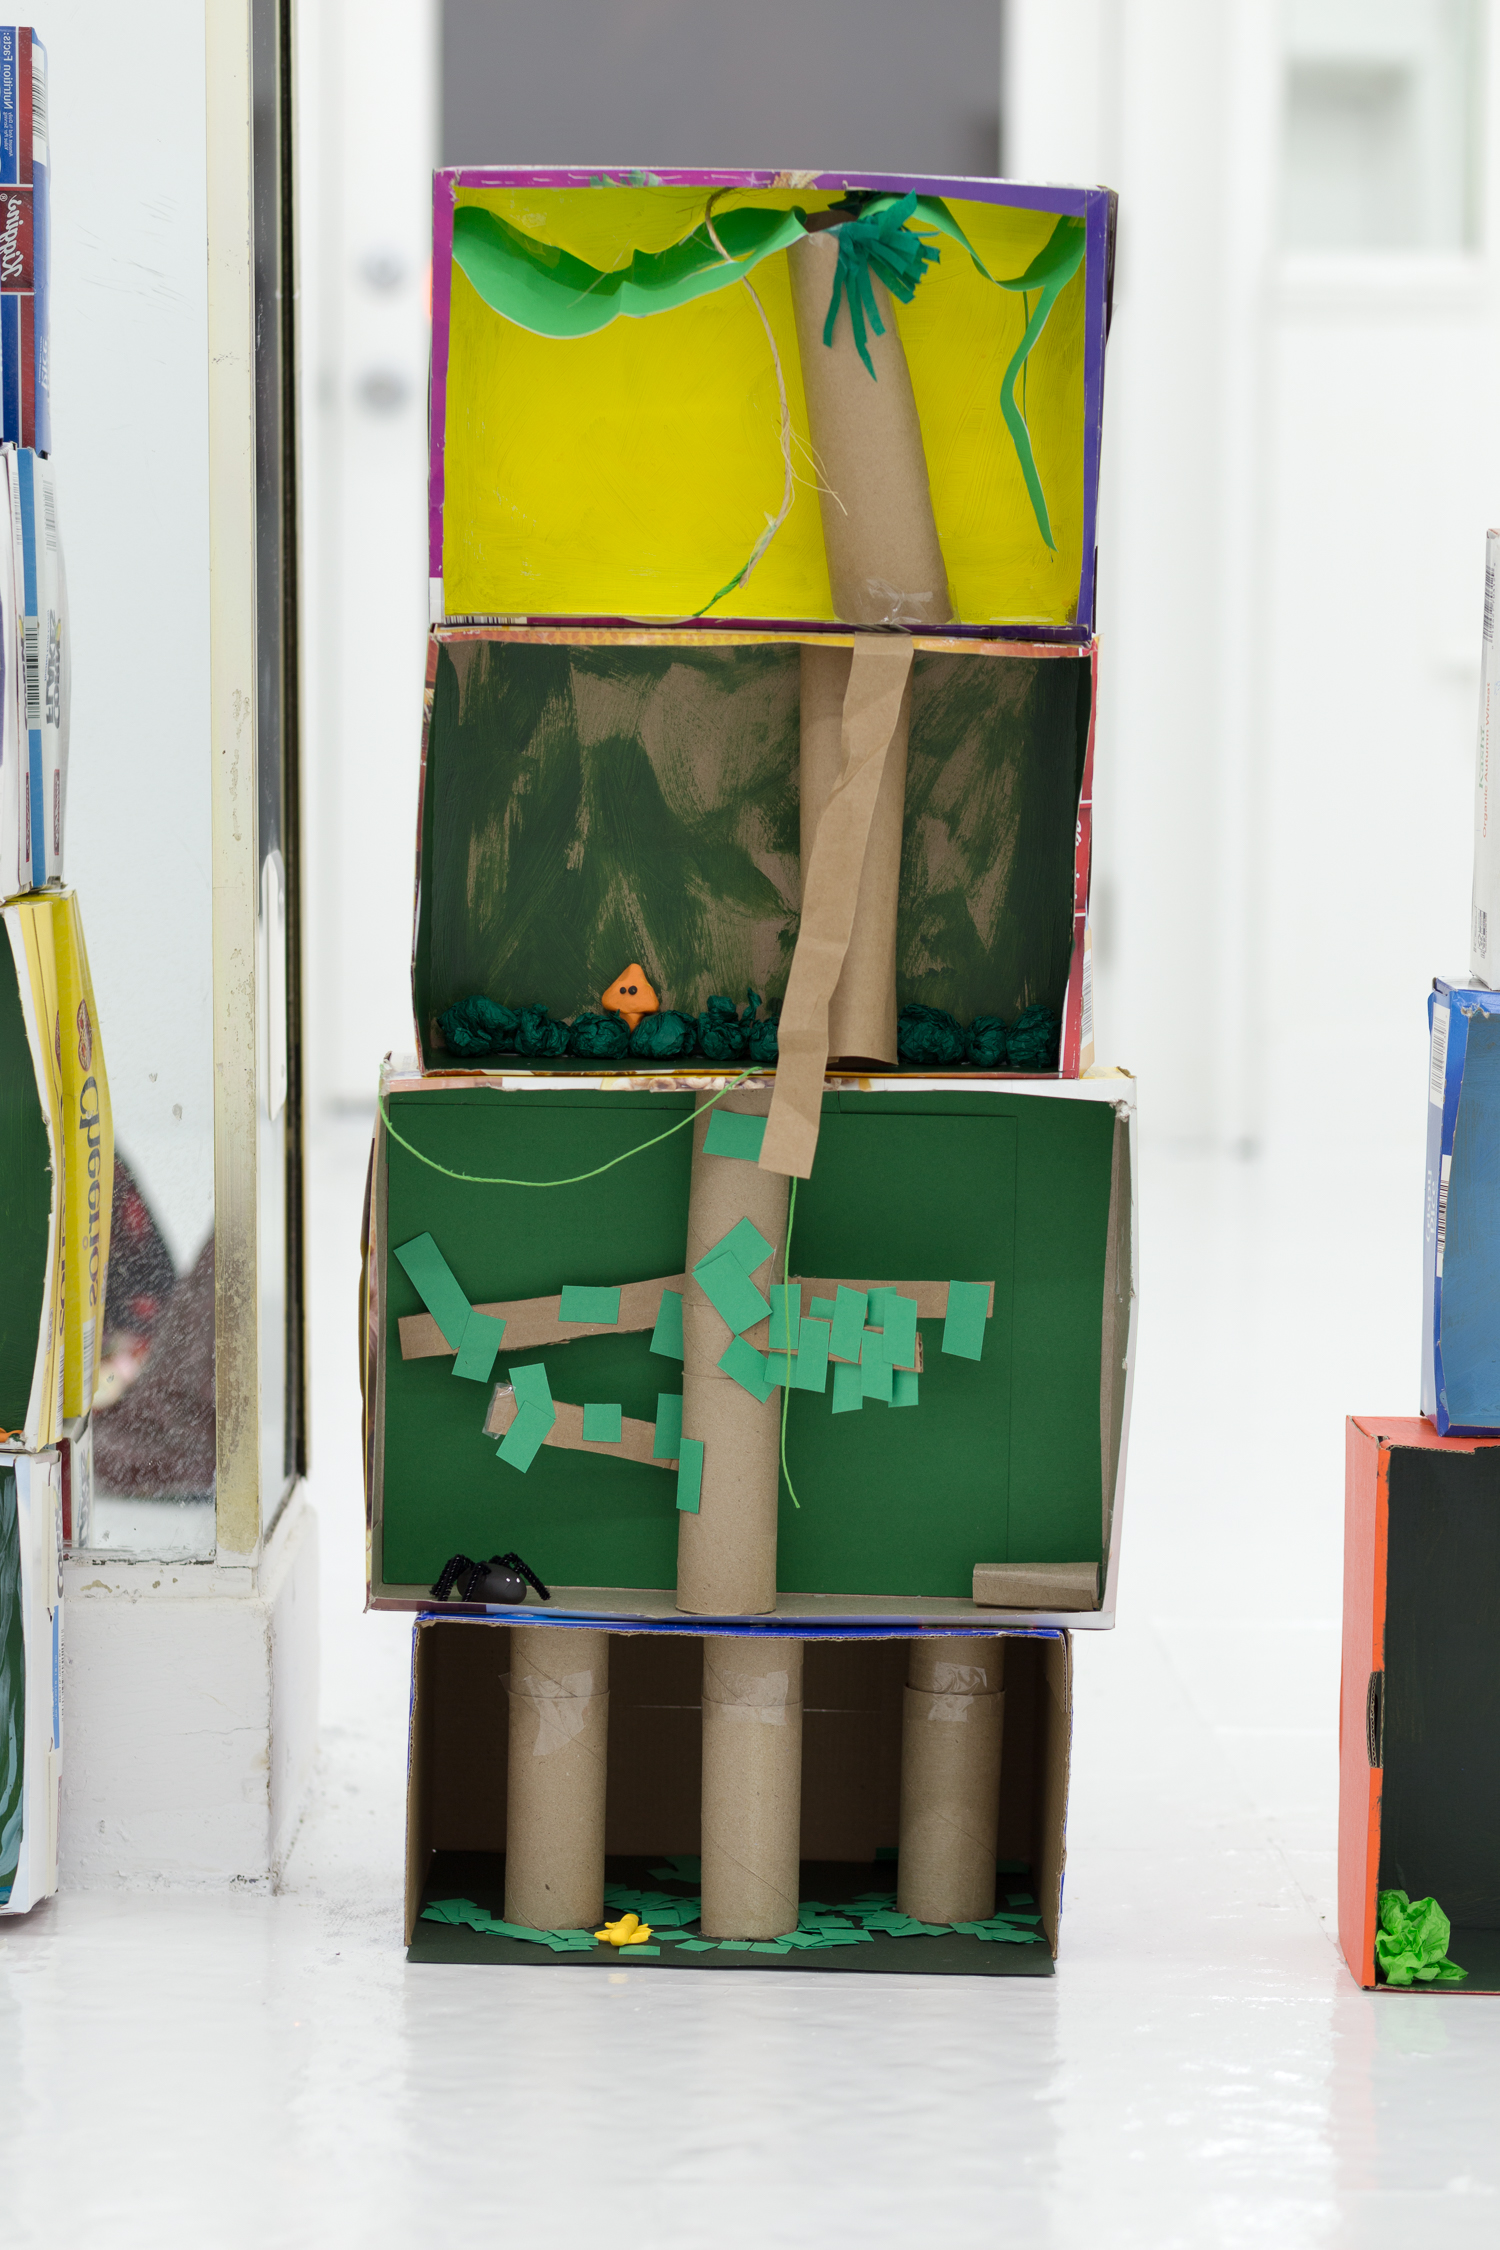 Rainforest diorama made of stacked boxes, toilet paper tubes, and crepe paper